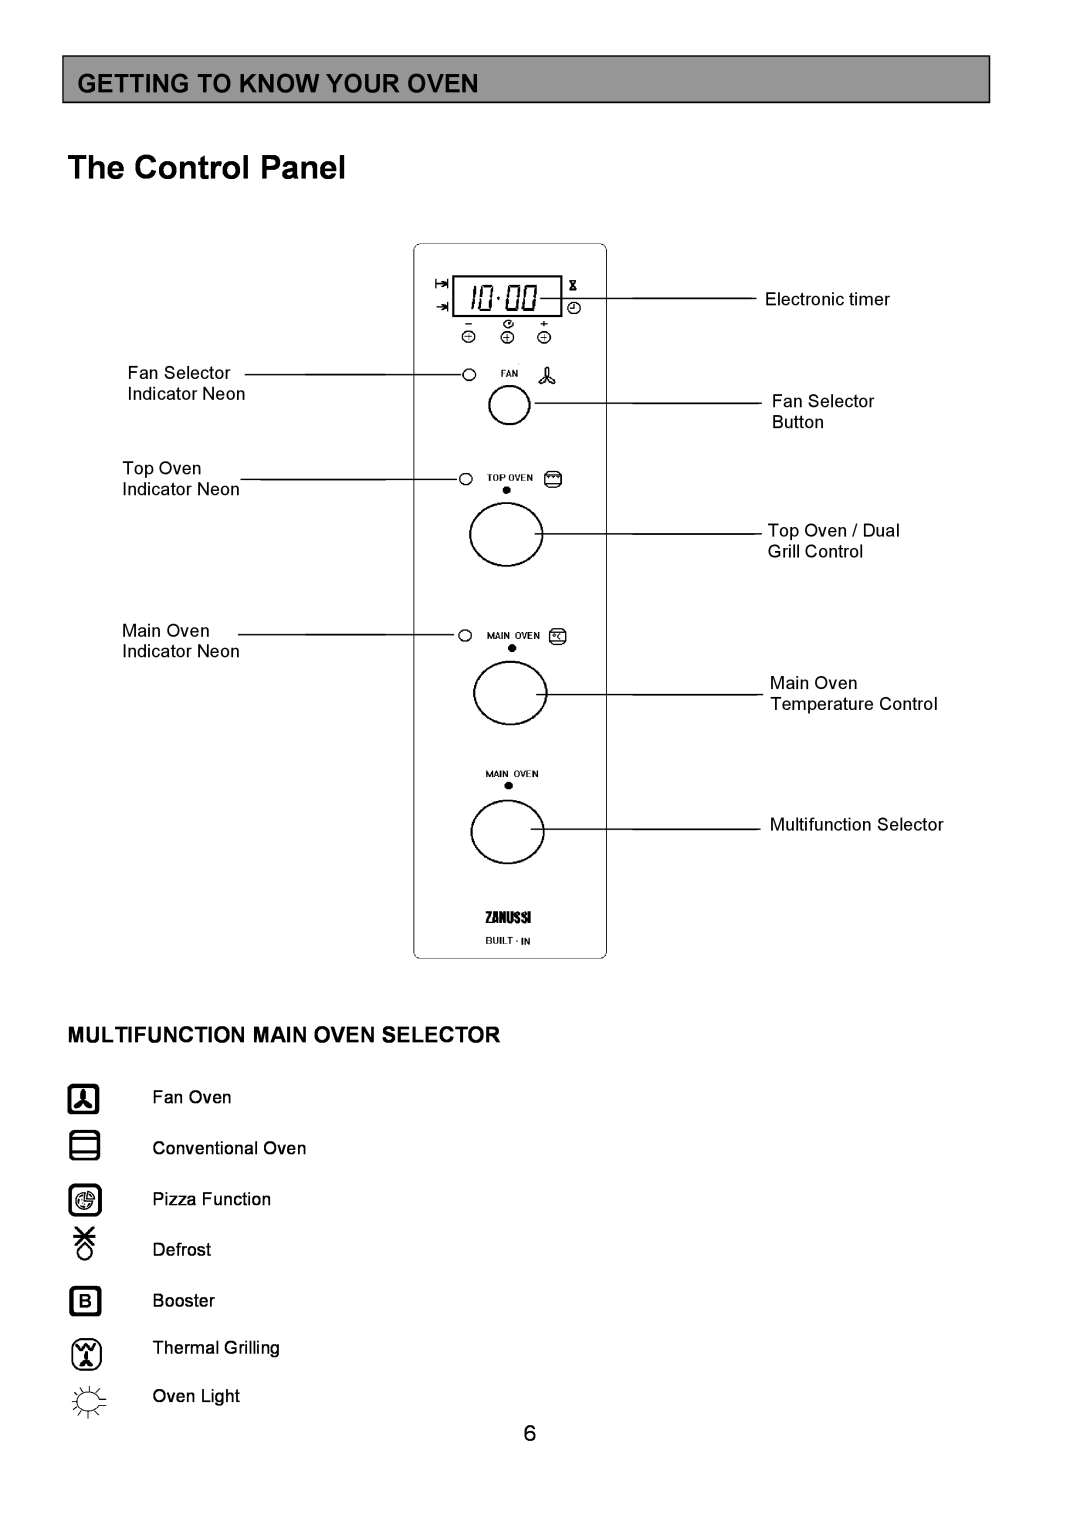 Zanussi 311608901 manual The Control Panel, Getting To Know Your Oven, Multifunction Main Oven Selector 